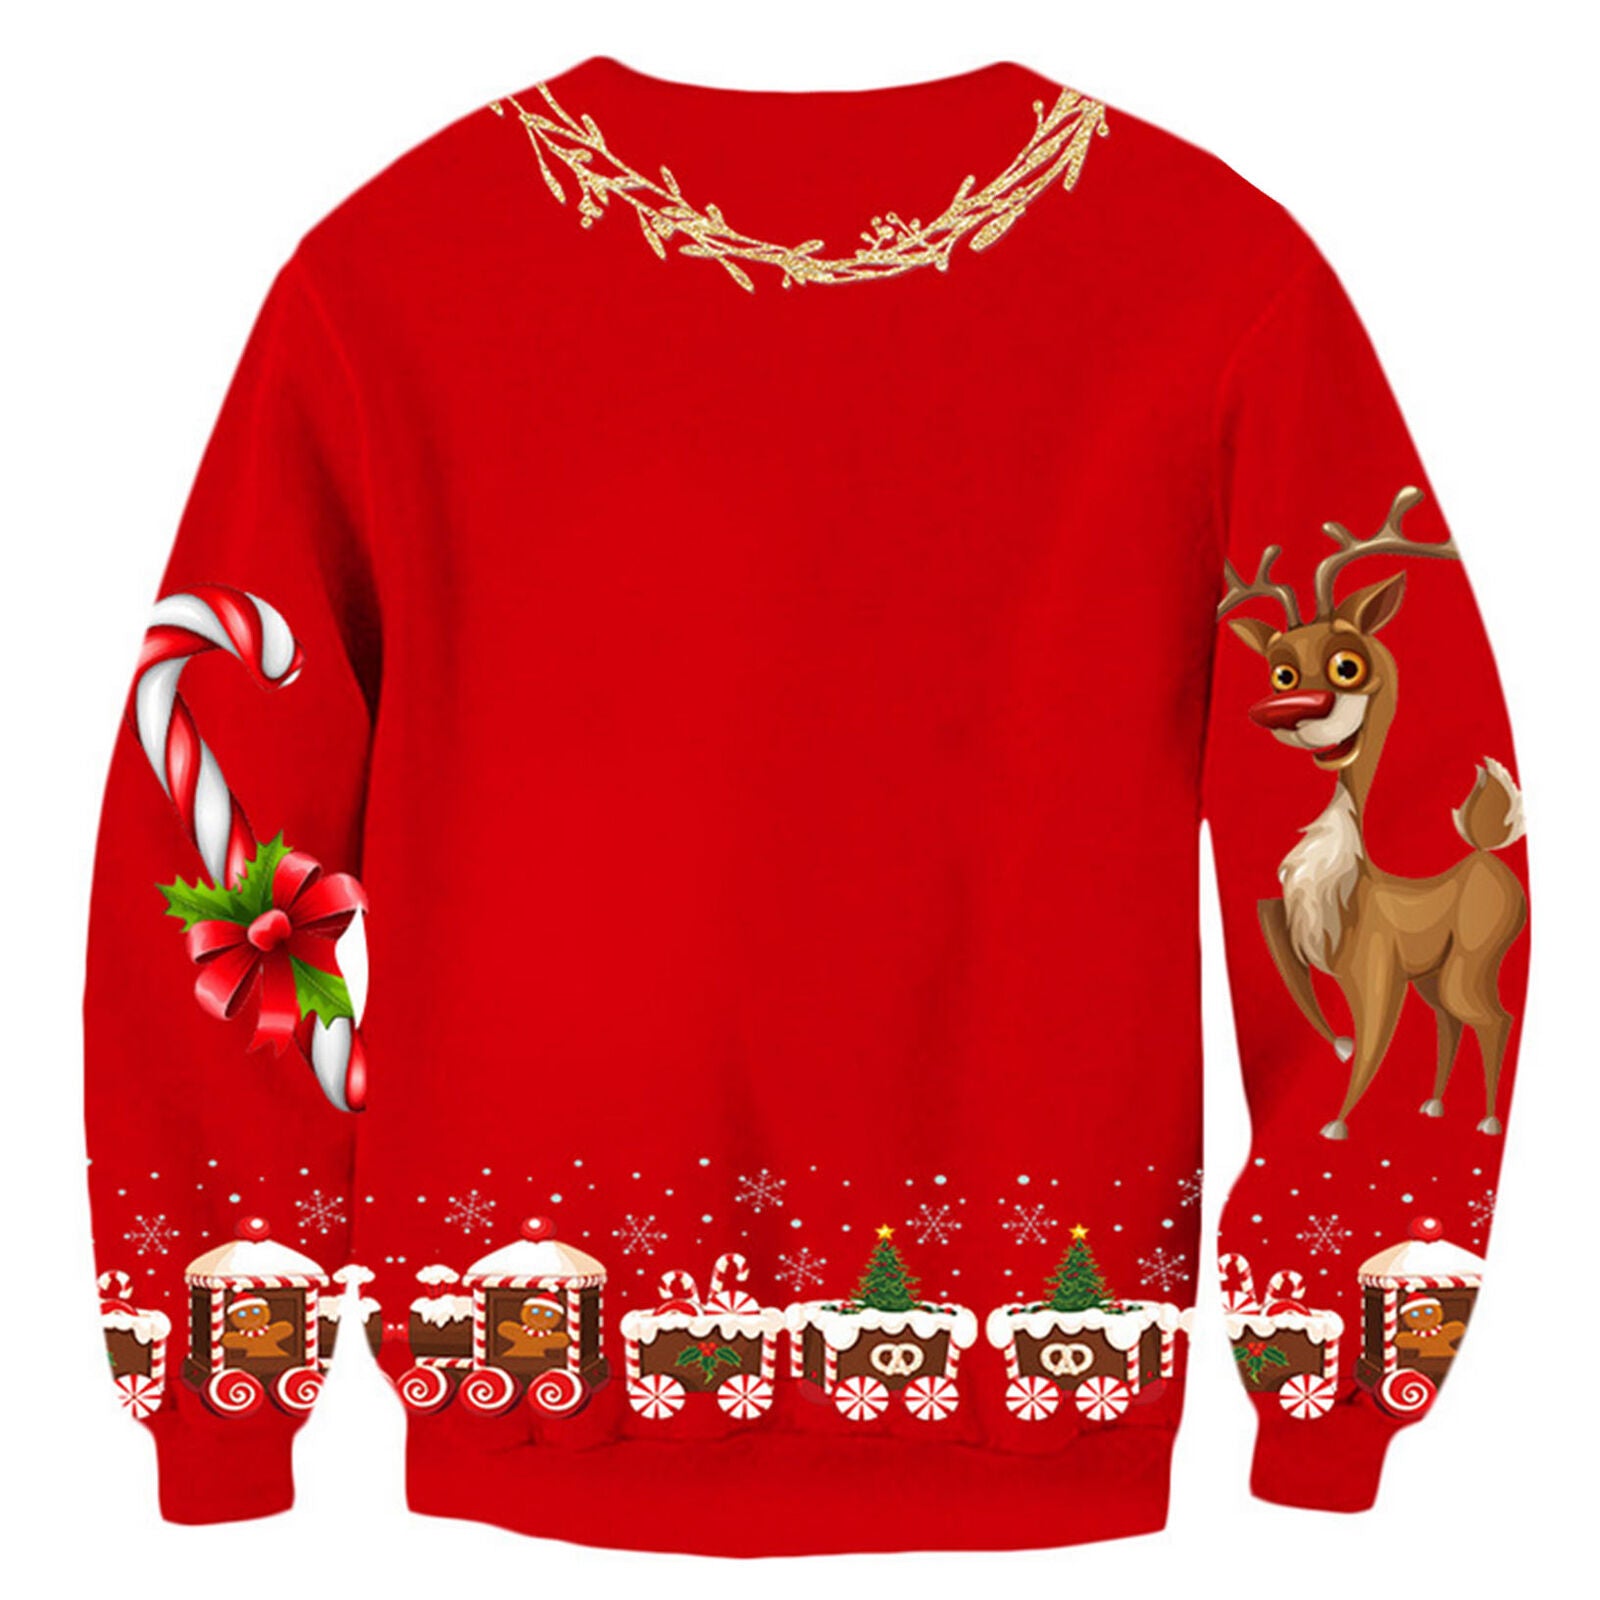 Mens Womens UGLY Christmas Sweater Sweatshirt Xmas Knitted Pullover Hoodie Tops